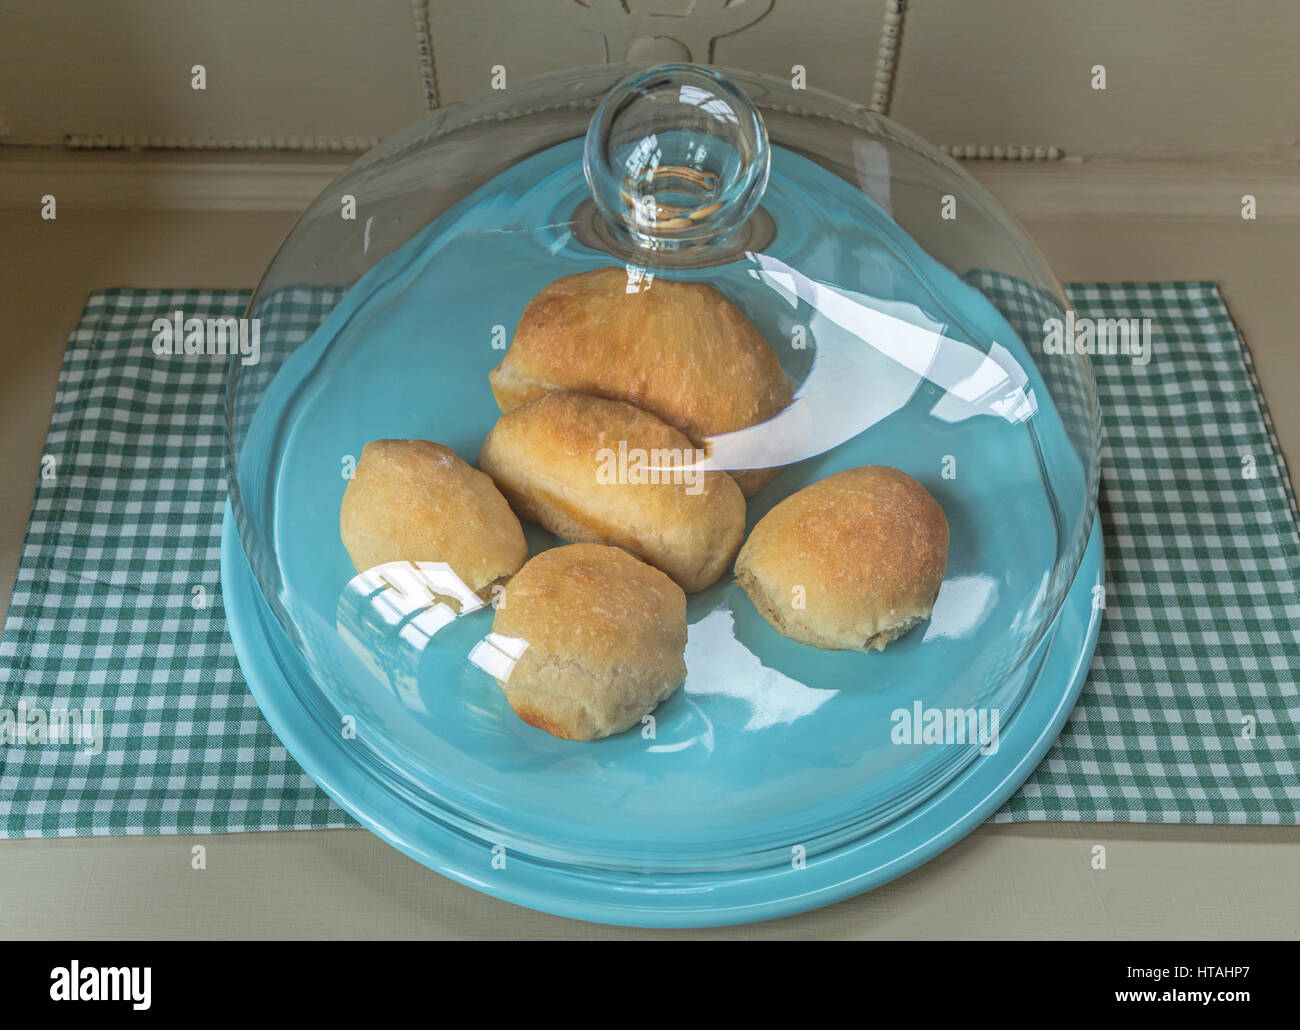 Home baked bread rolls on a glass topped cake stand. Stock Photo